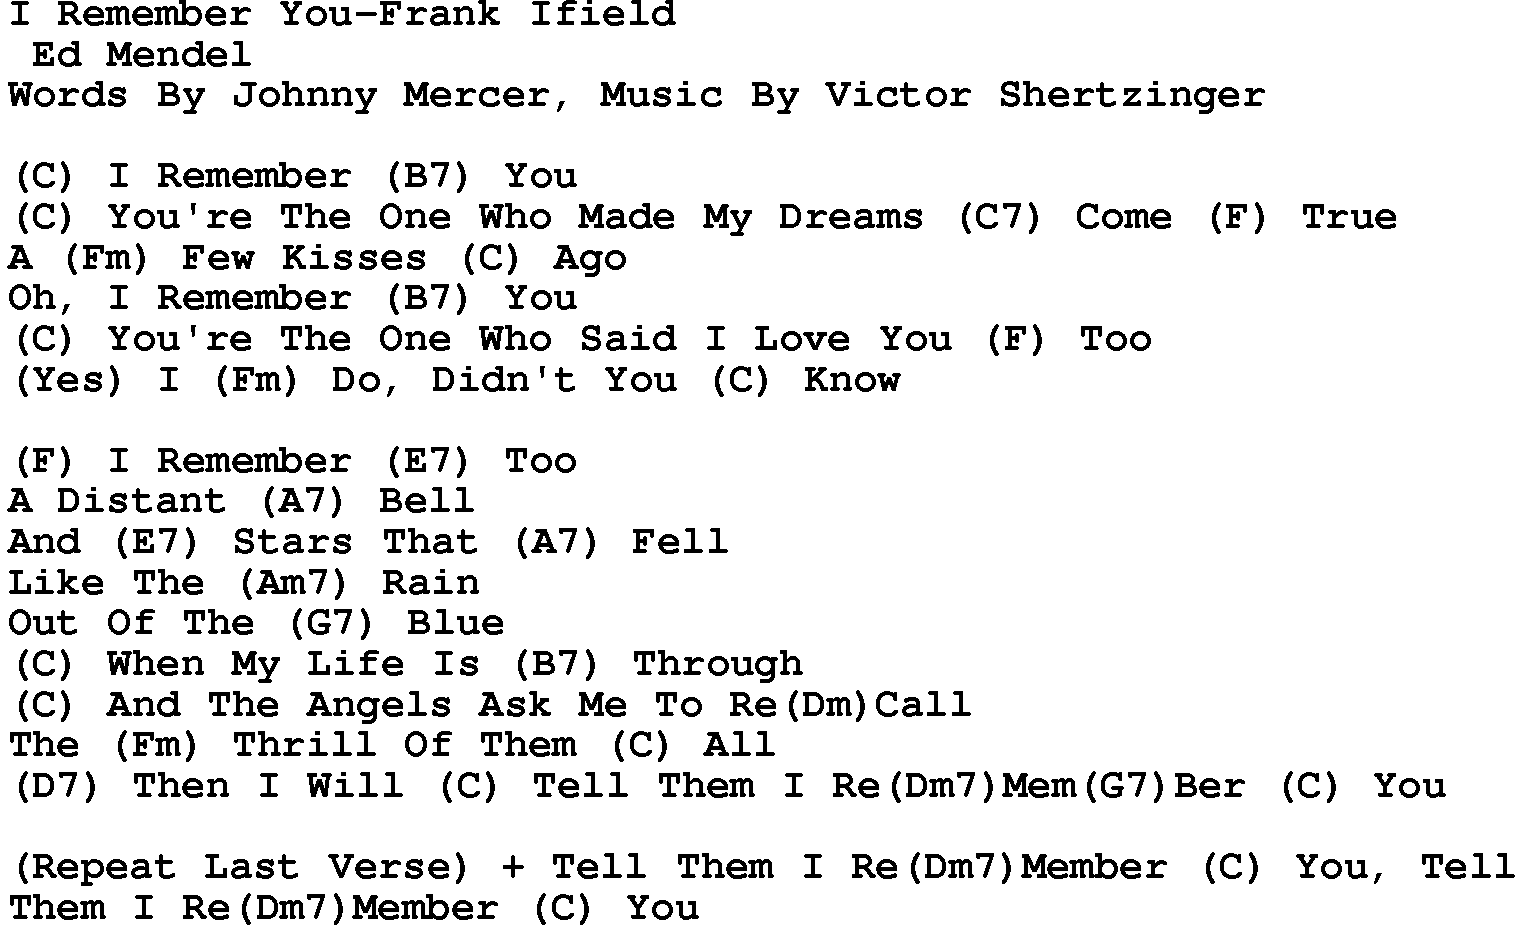 Country music song: I Remember You-Frank Ifield lyrics and chords